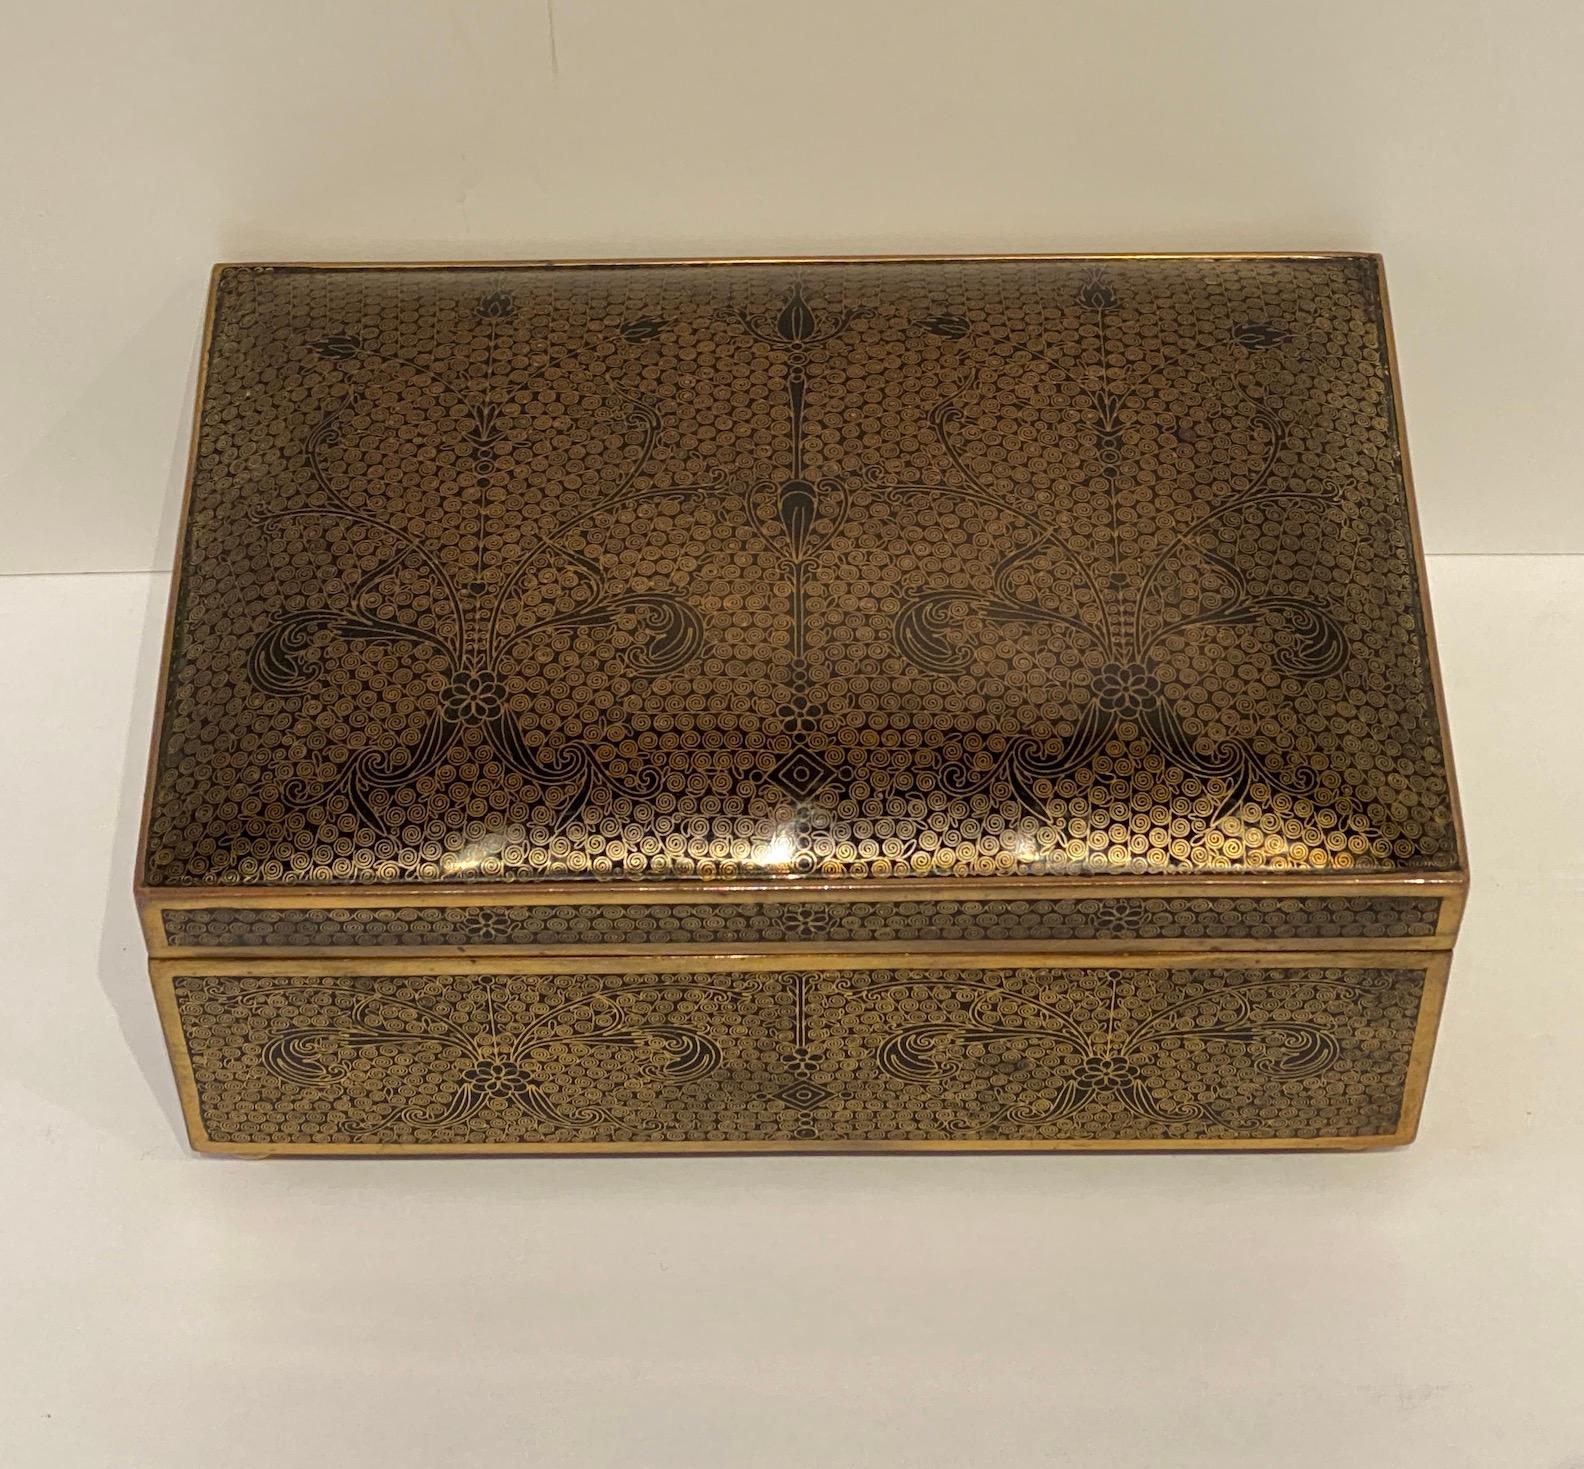 A beautiful, intricate, cloisonné hinged box with ebonzed wood liner.